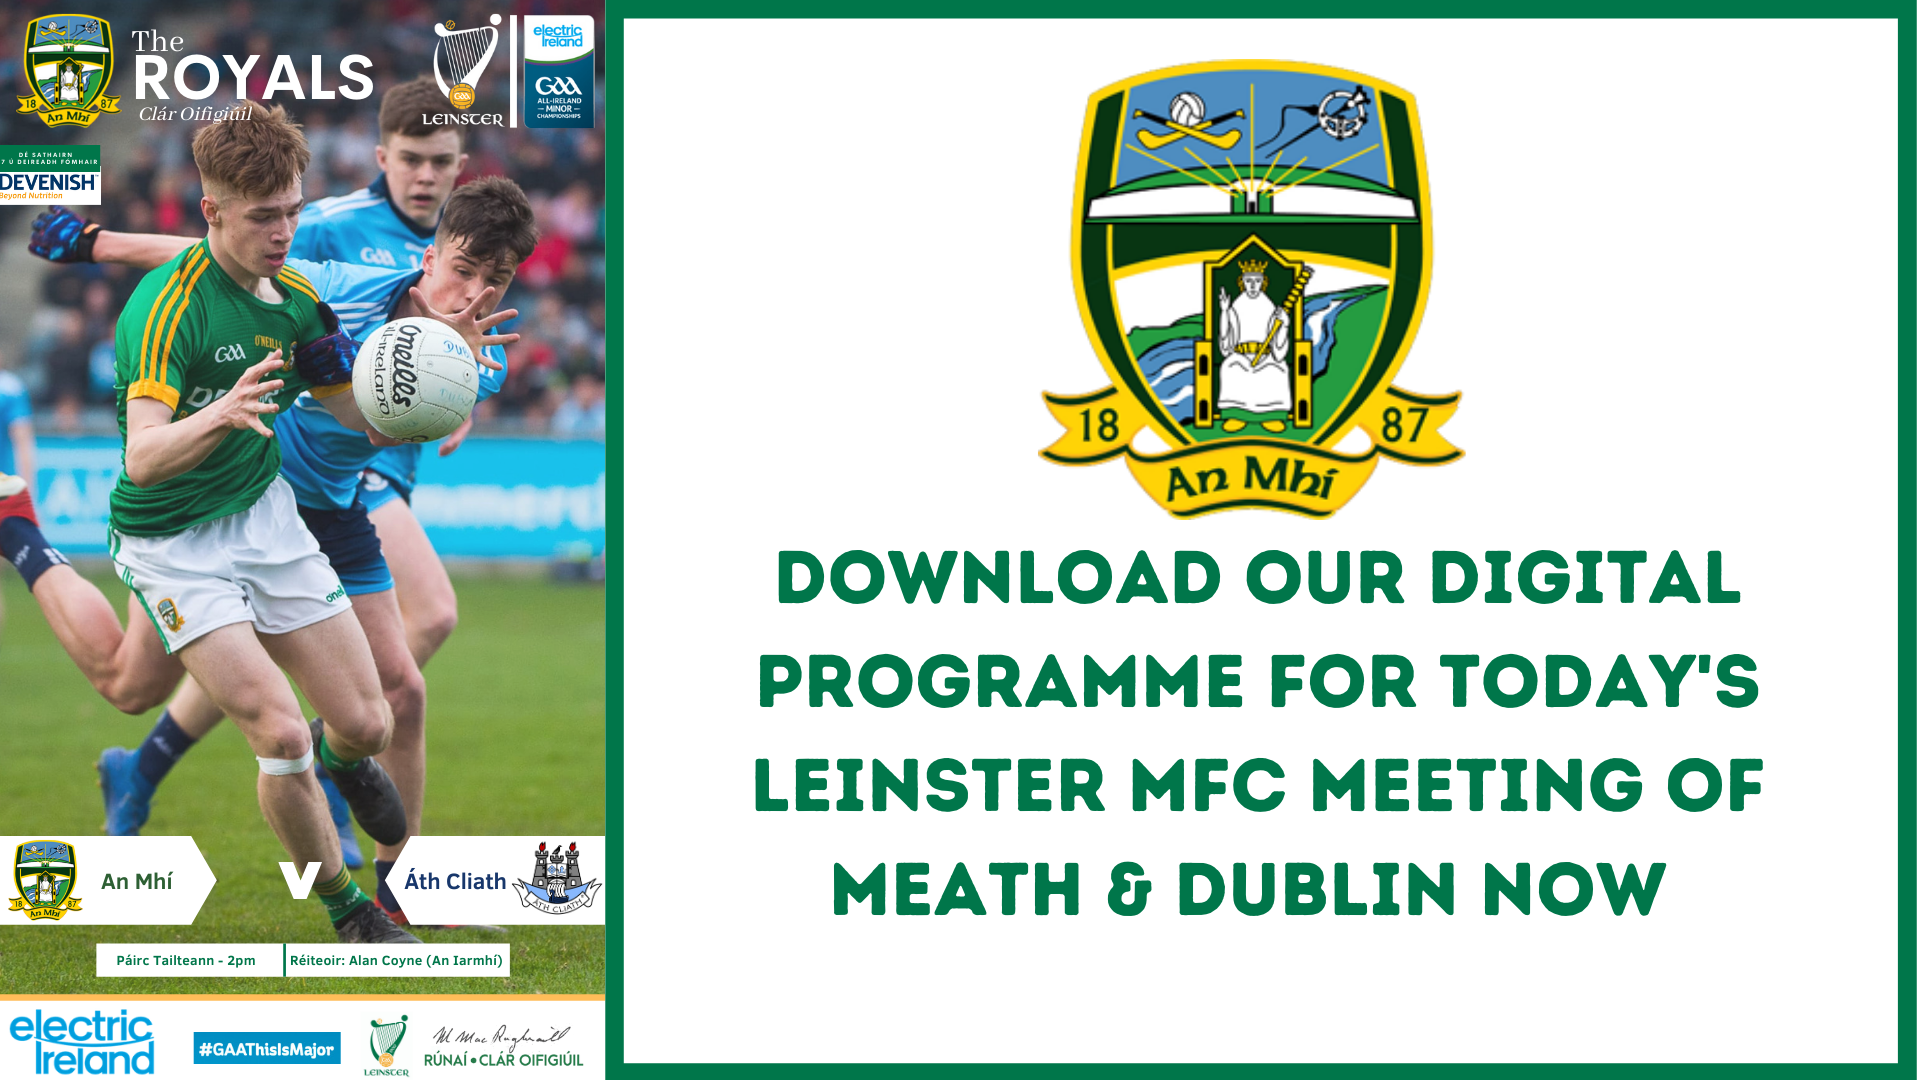 Get your Leinster MFC Championship programme now